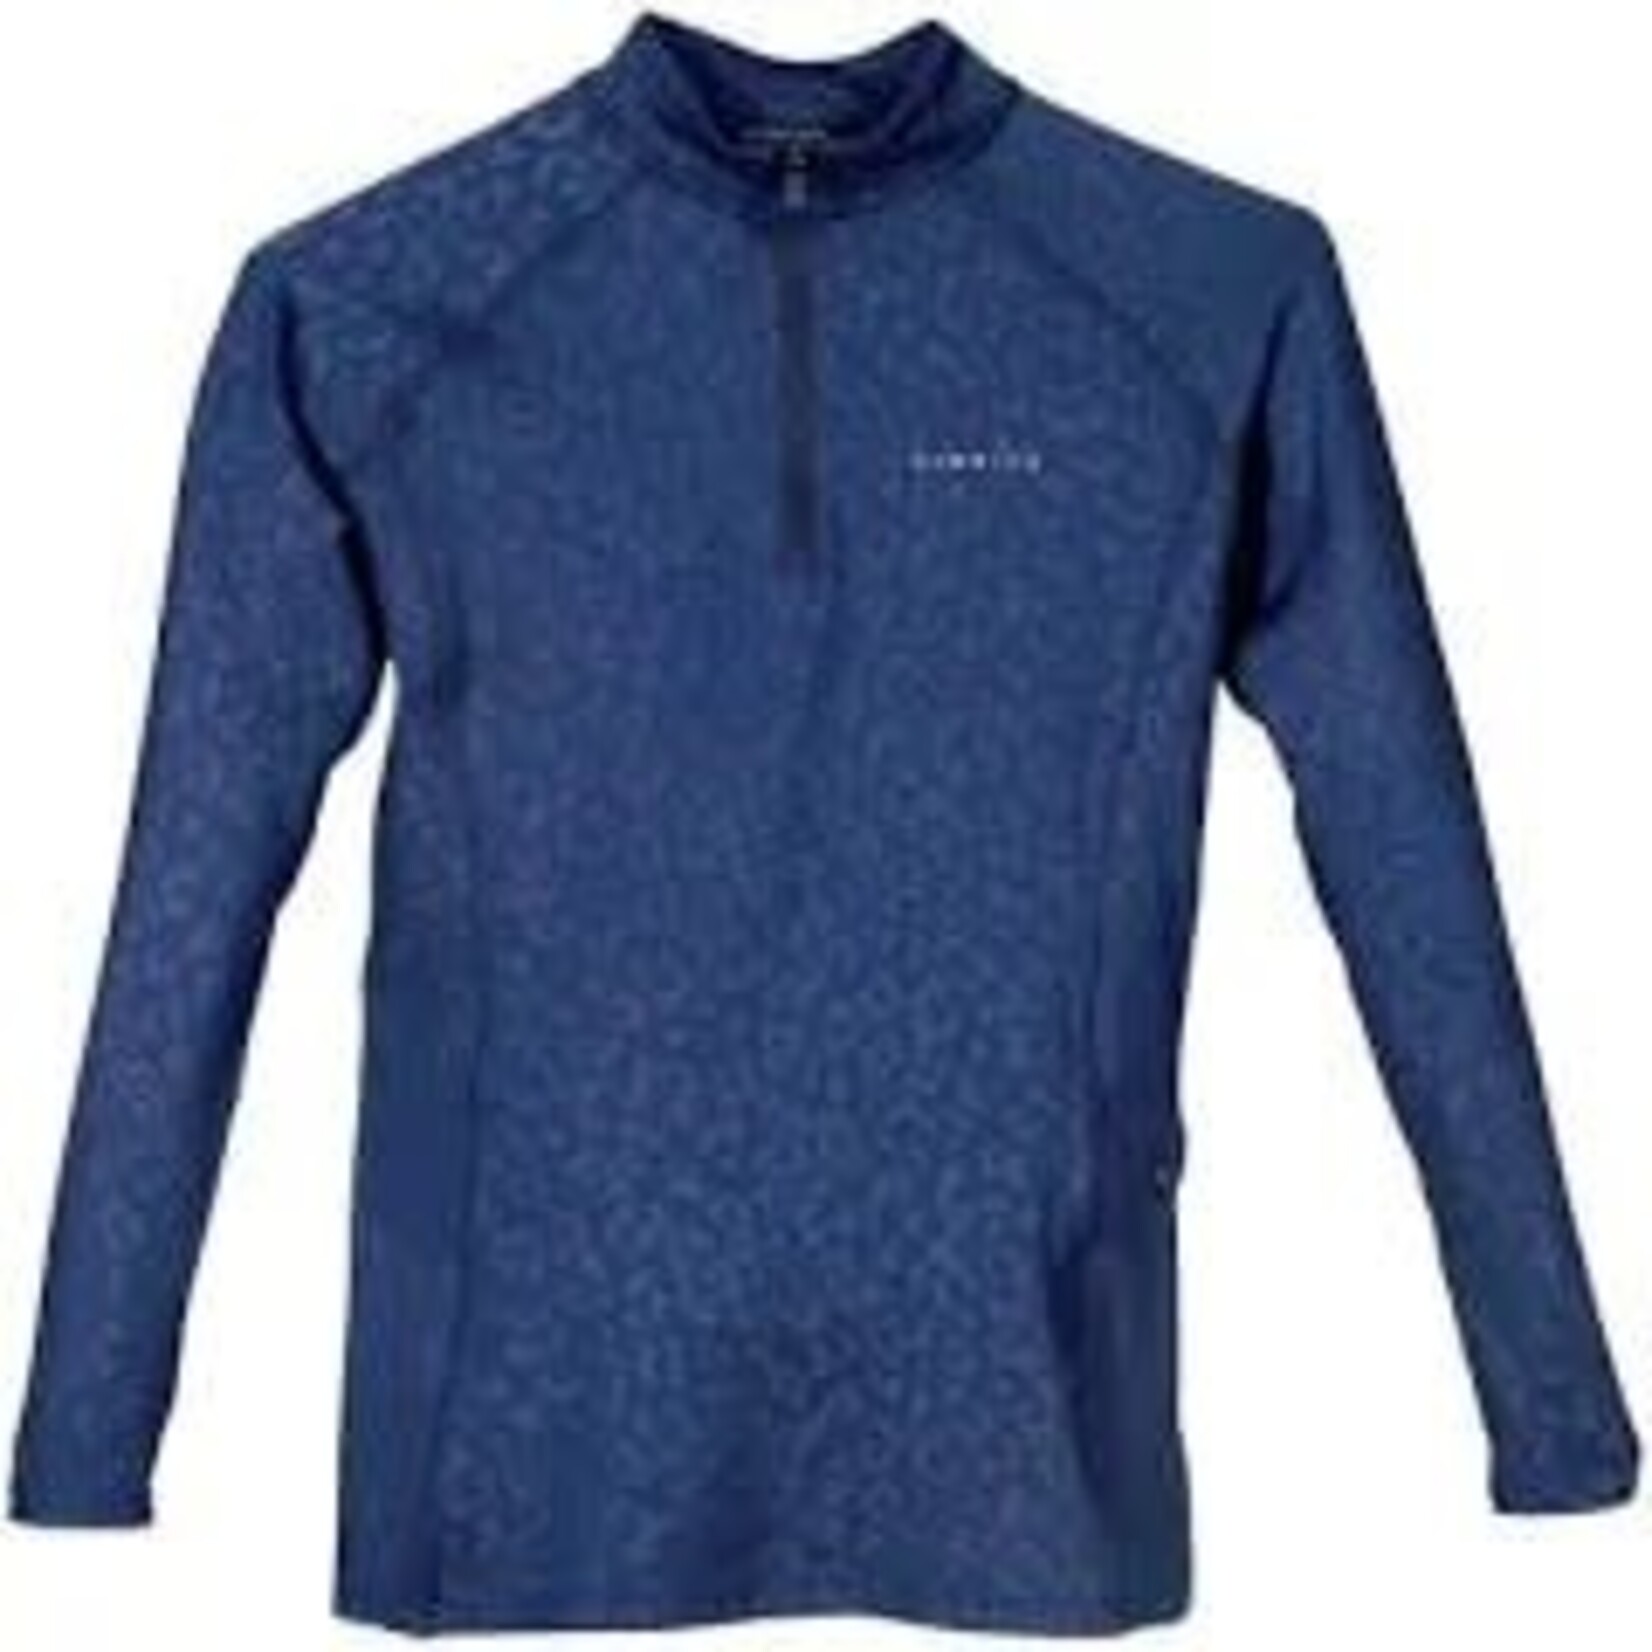 Aubrion Revive Baselayer - Young Rider